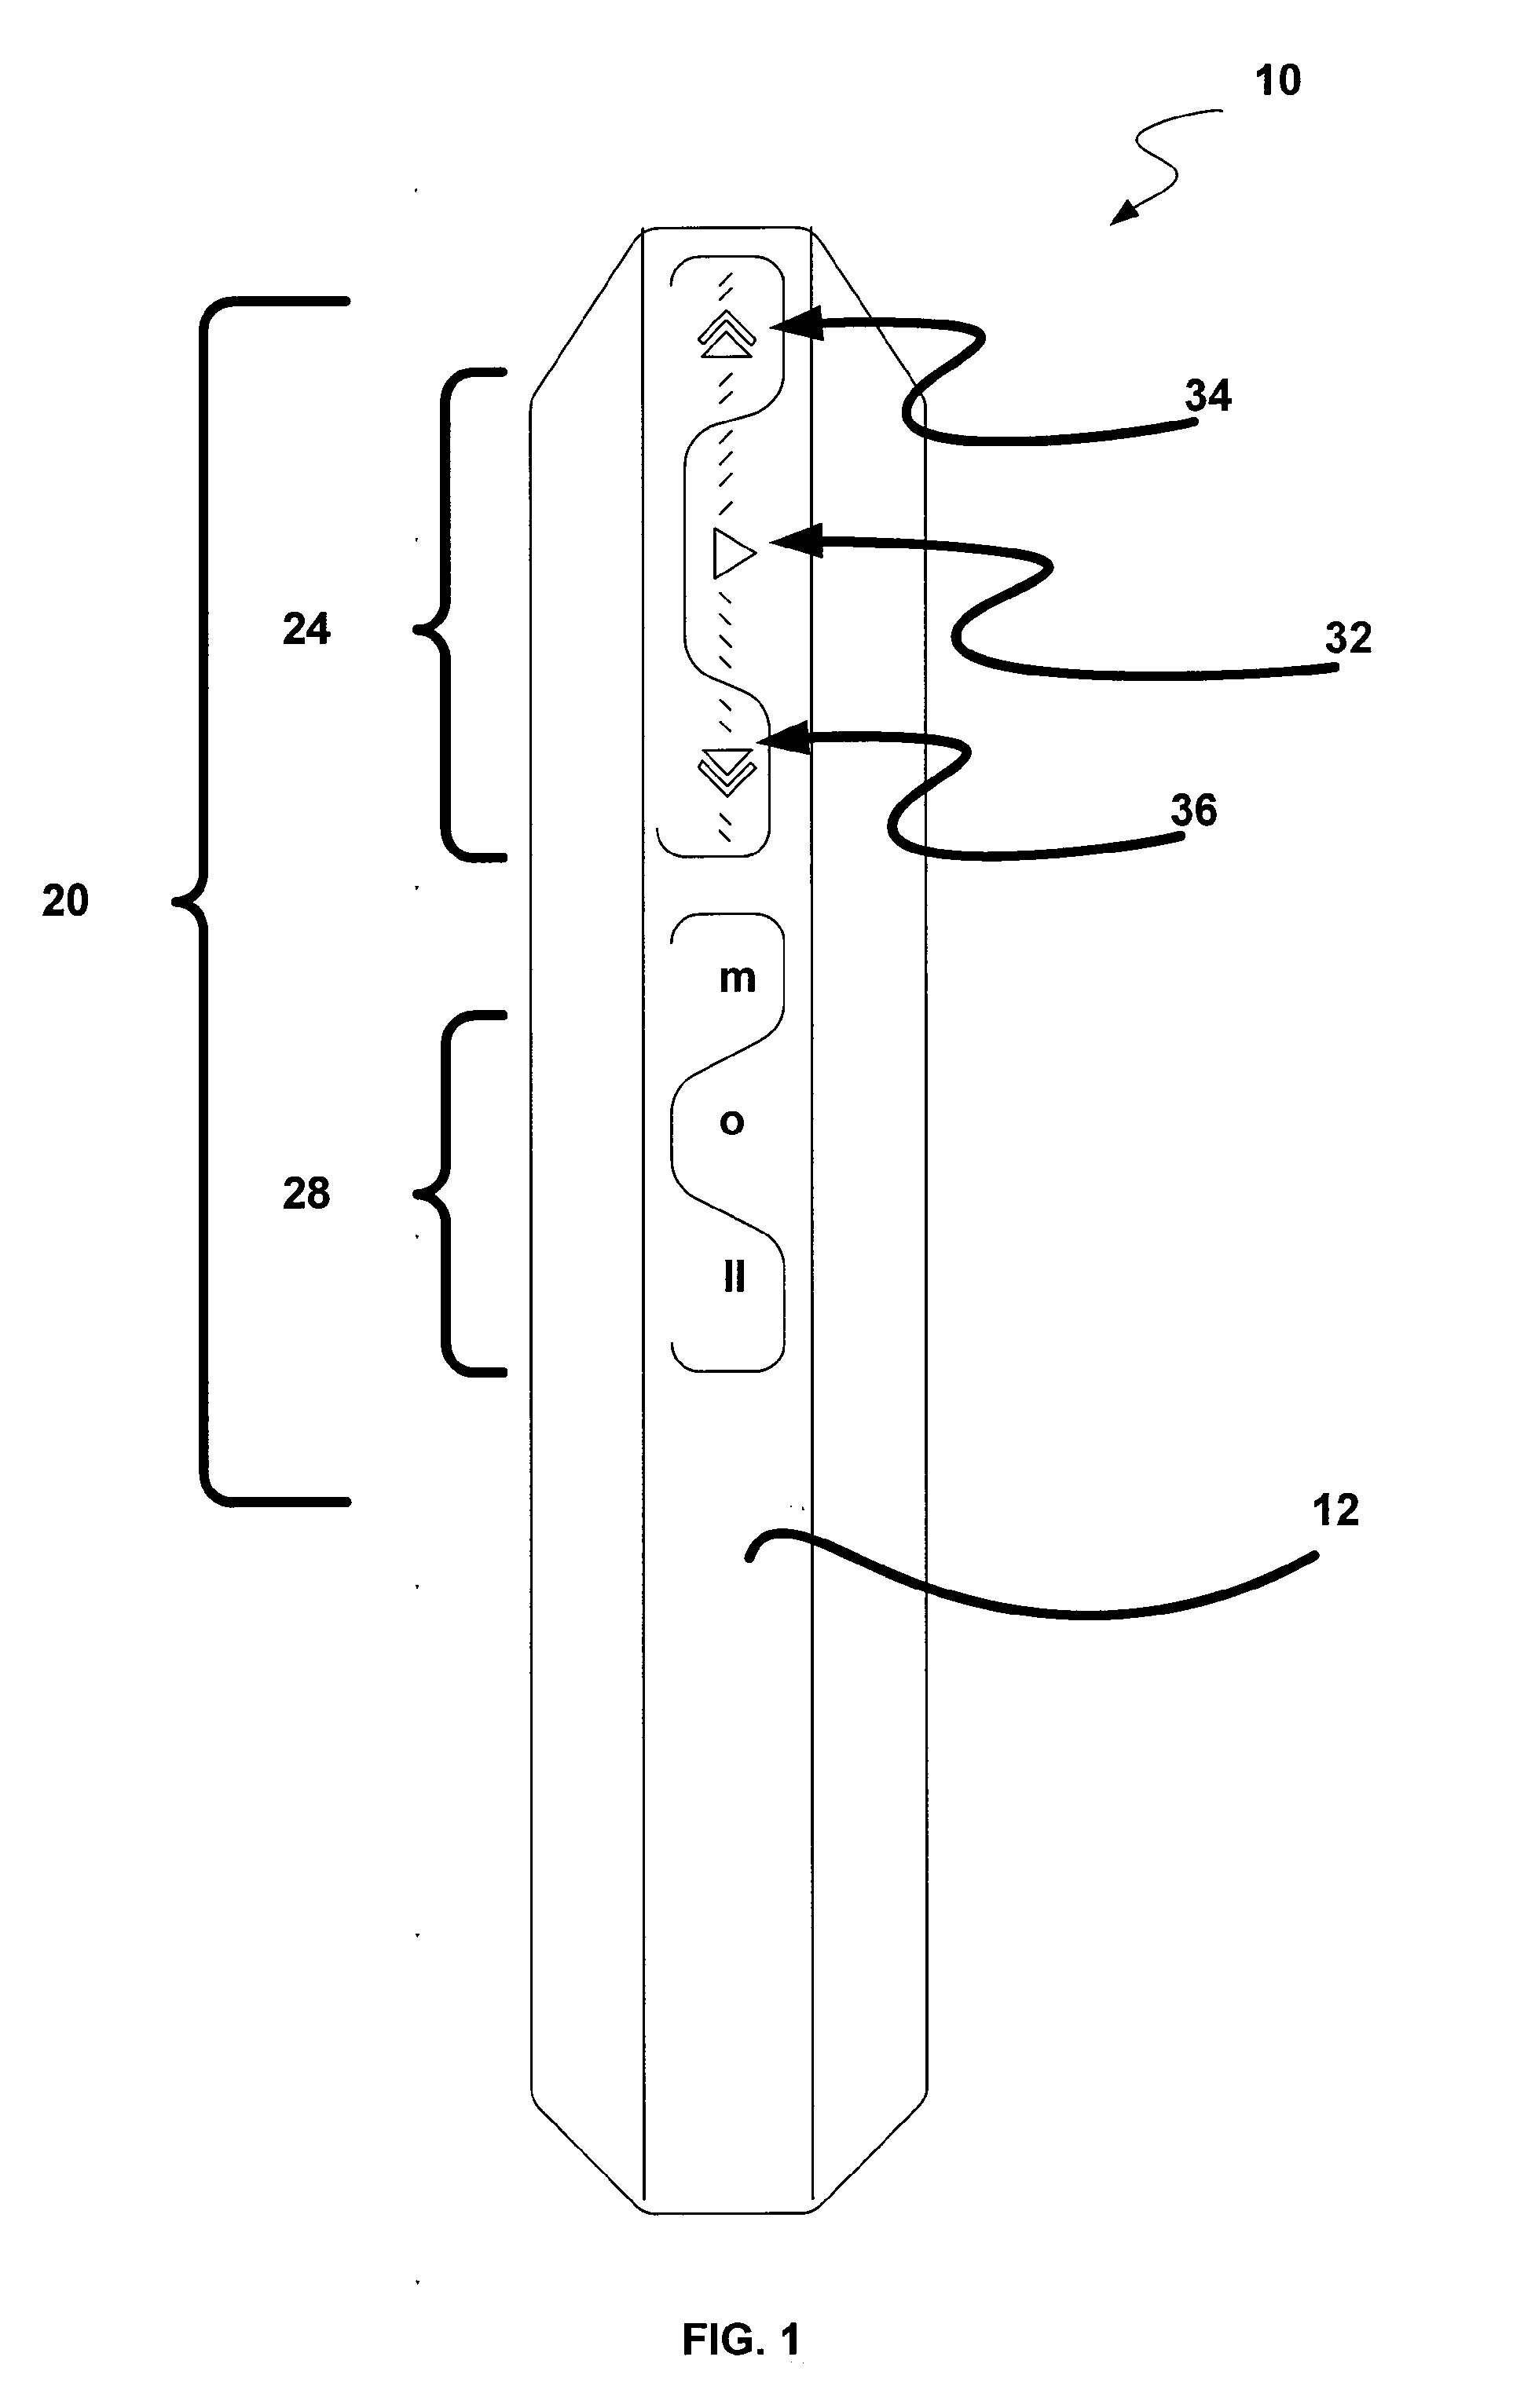 Input interface including push-sensitive mechanical switch in combination with capacitive touch sensor